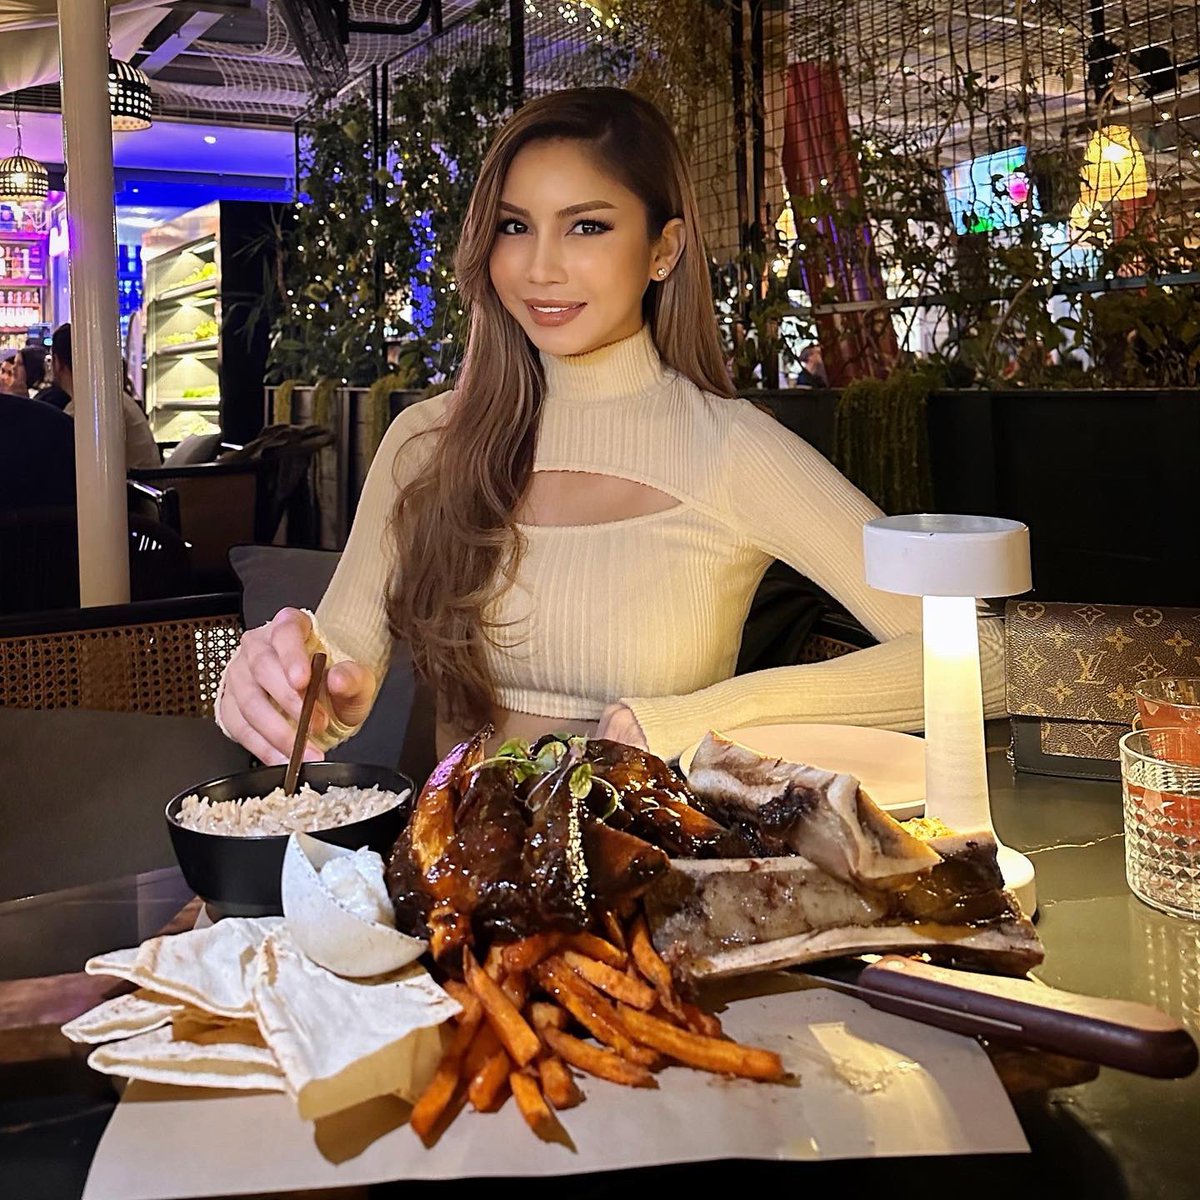 Everyone should have cheat days or days off. You need to balance the unhealthy
with the healthy
🥩🥓🍔🥘🍝🍤🍩🥂.
.
.
#cheatday #lovefood #positive #steakdinner #yesterday #havefun #ootd #foodoninstagram #instafood #sydney #syd #australia #foodsydney #nursajat